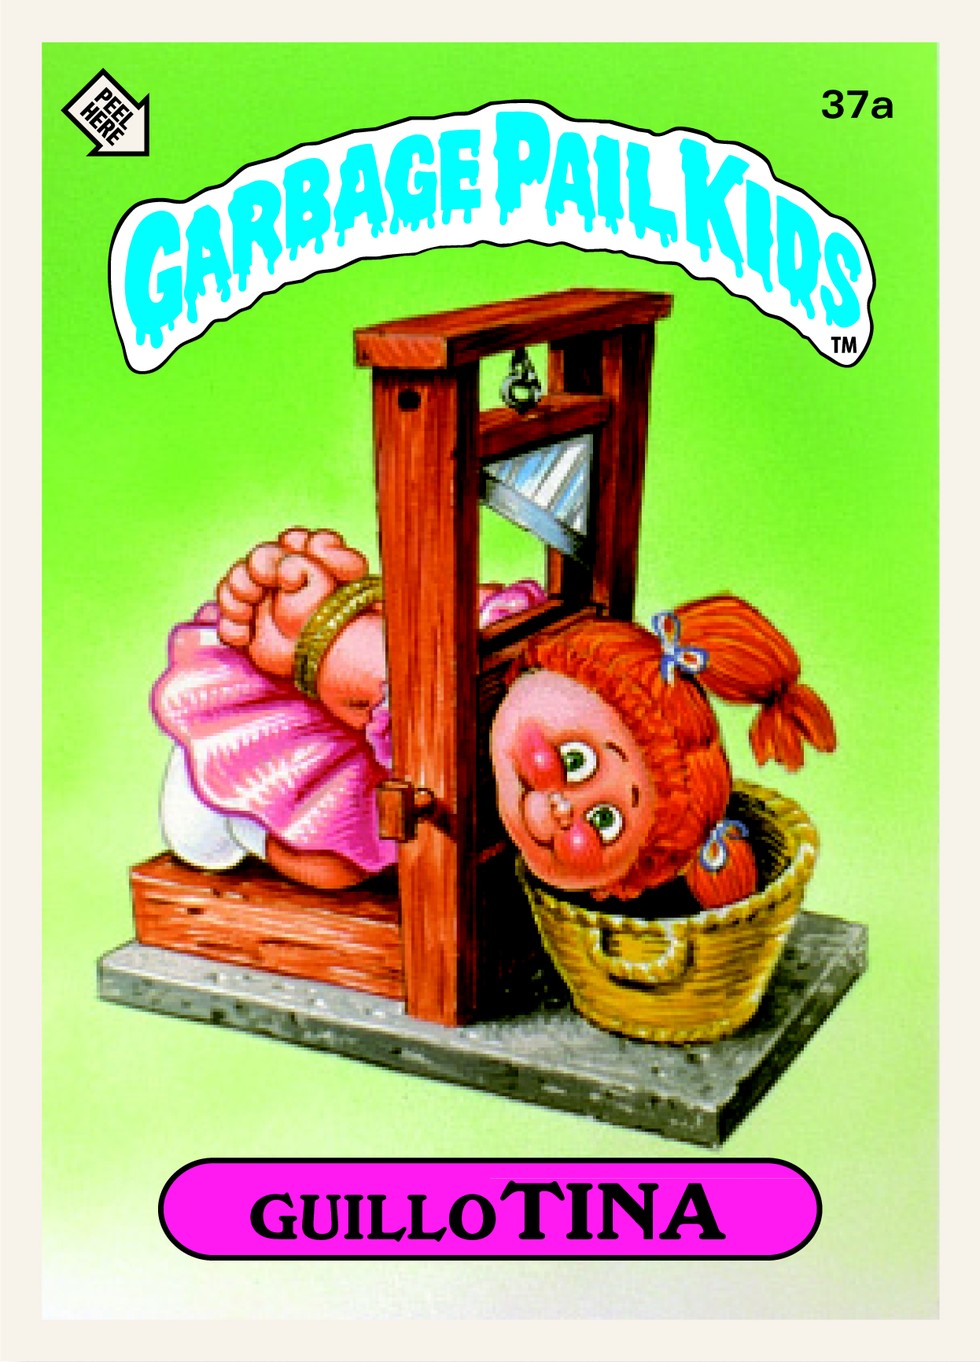 Check Out Original Garbage Pail Kids Cards From the Upcoming Topps Book